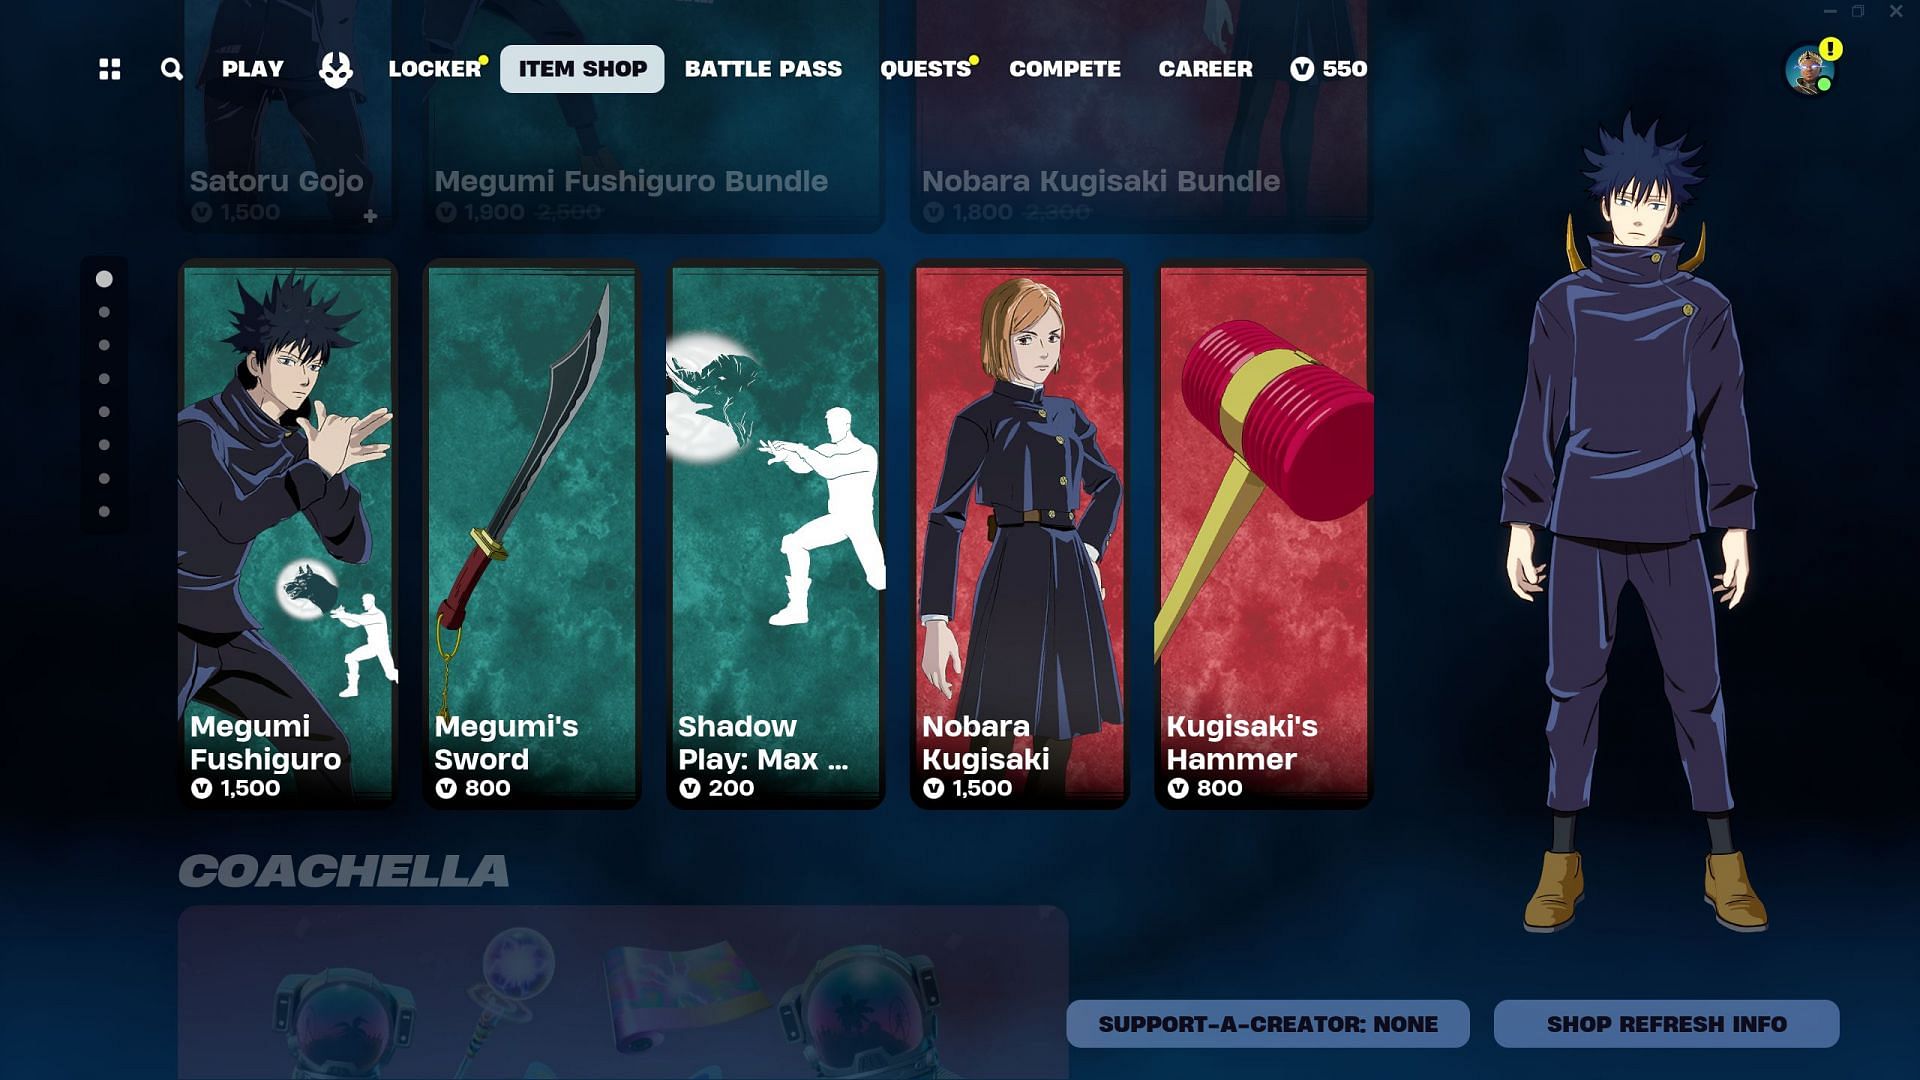 Jujutsu Kaisen skins could remain listed in the Item Shop until the end of this week (Image via Epic Games/Fortnite)